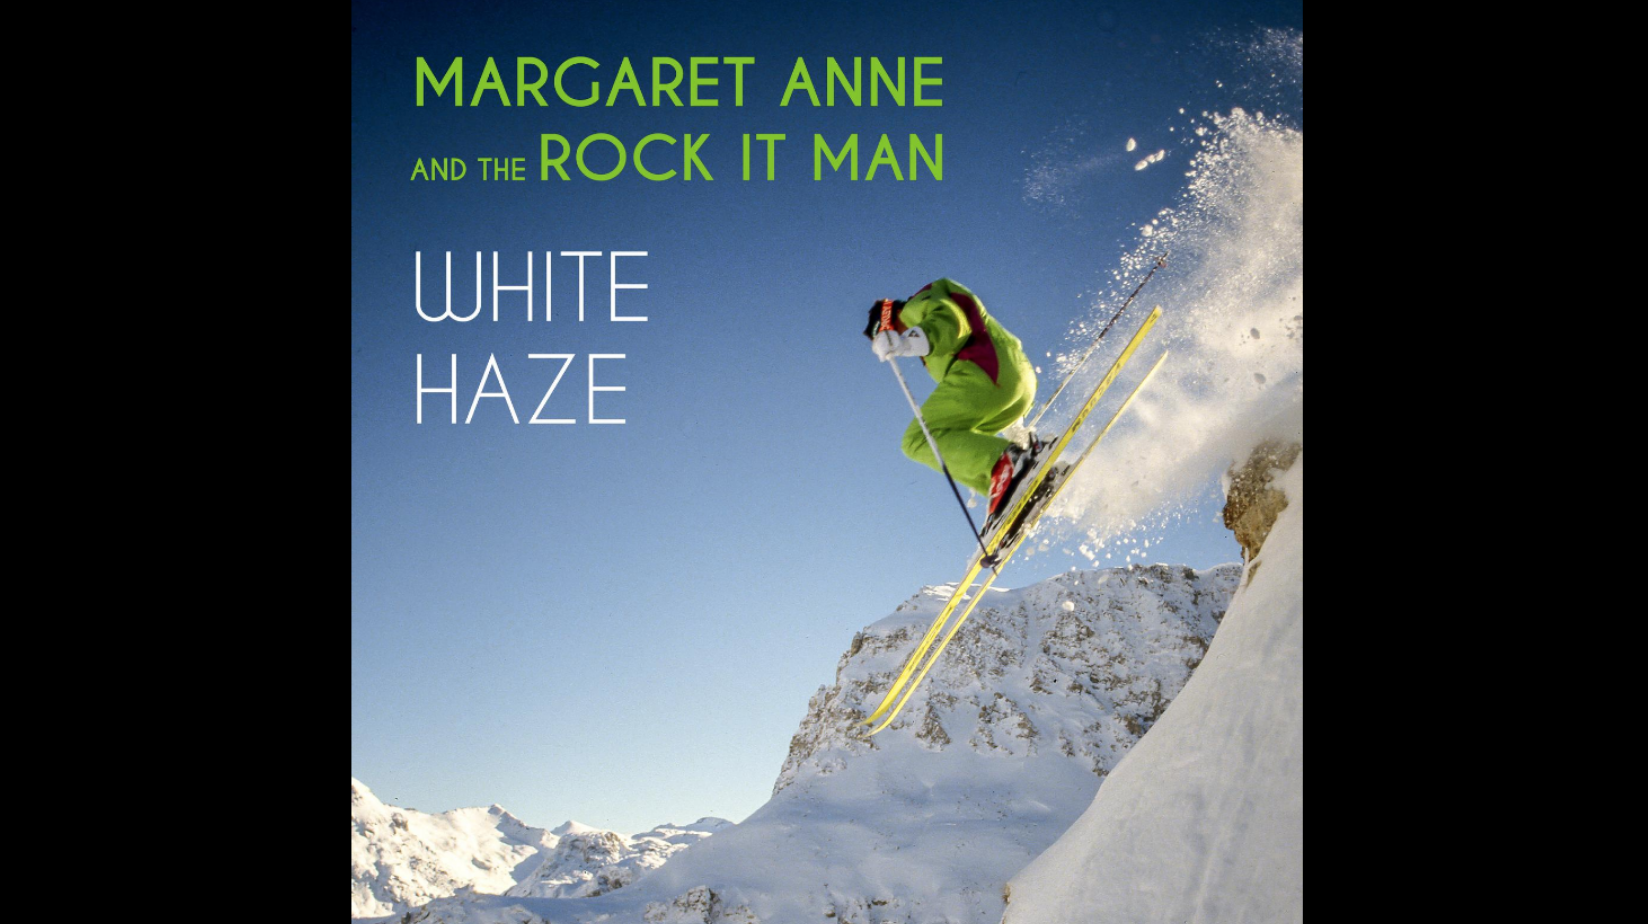 Margaret Anne and the Rock It Man